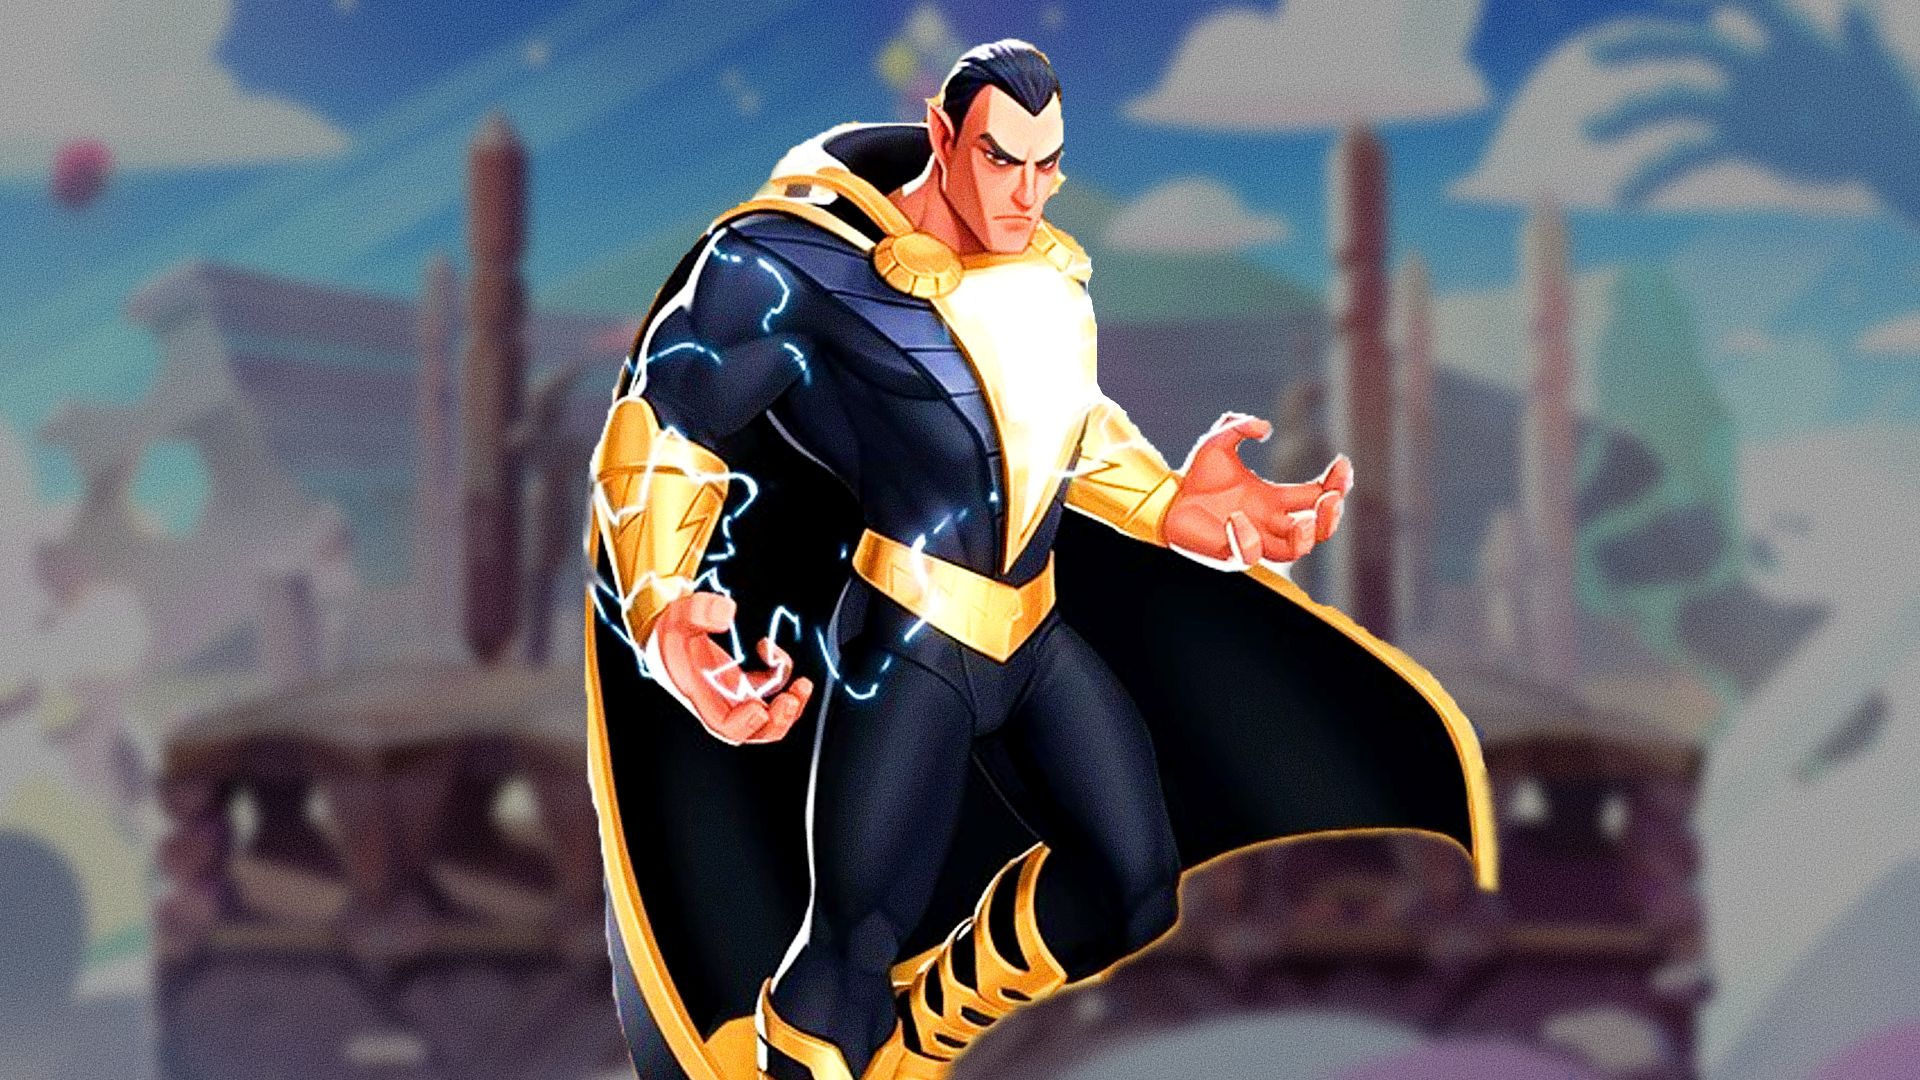 MultiVersus' Black Adam voice actor was in Dragon Ball Z and One Piece